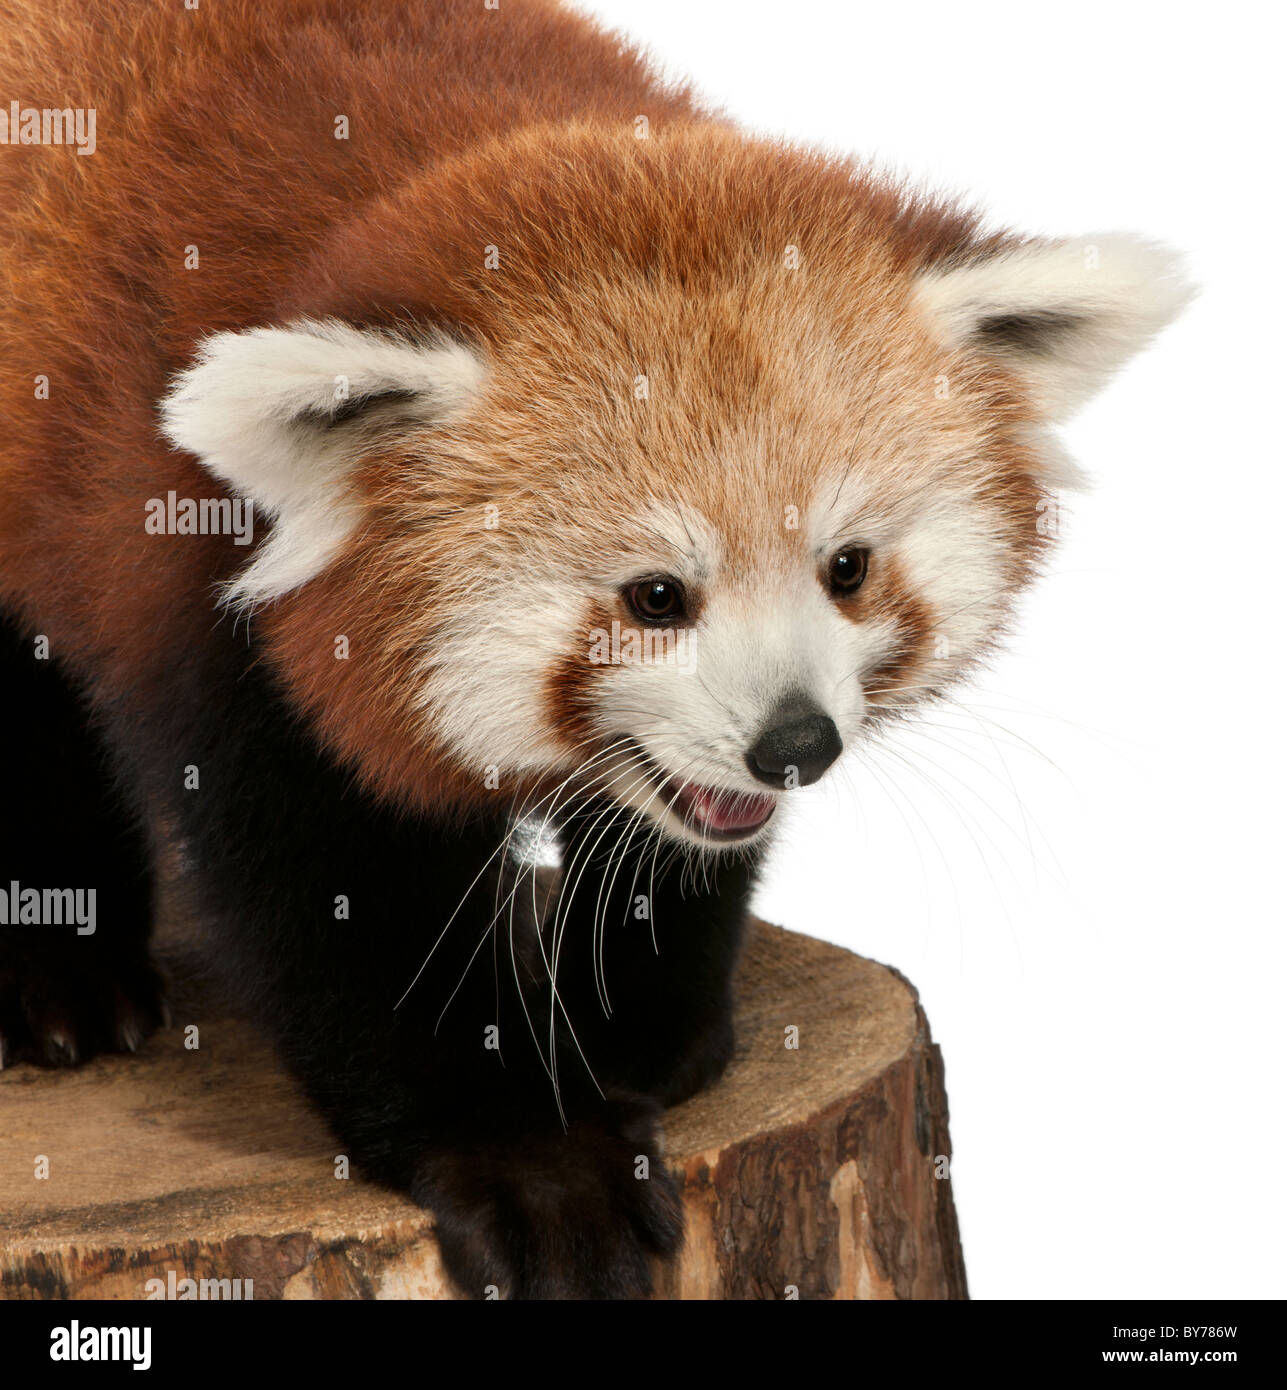 , Ailurus fulgens, 7 mois, on tree trunk in front of white background Banque D'Images